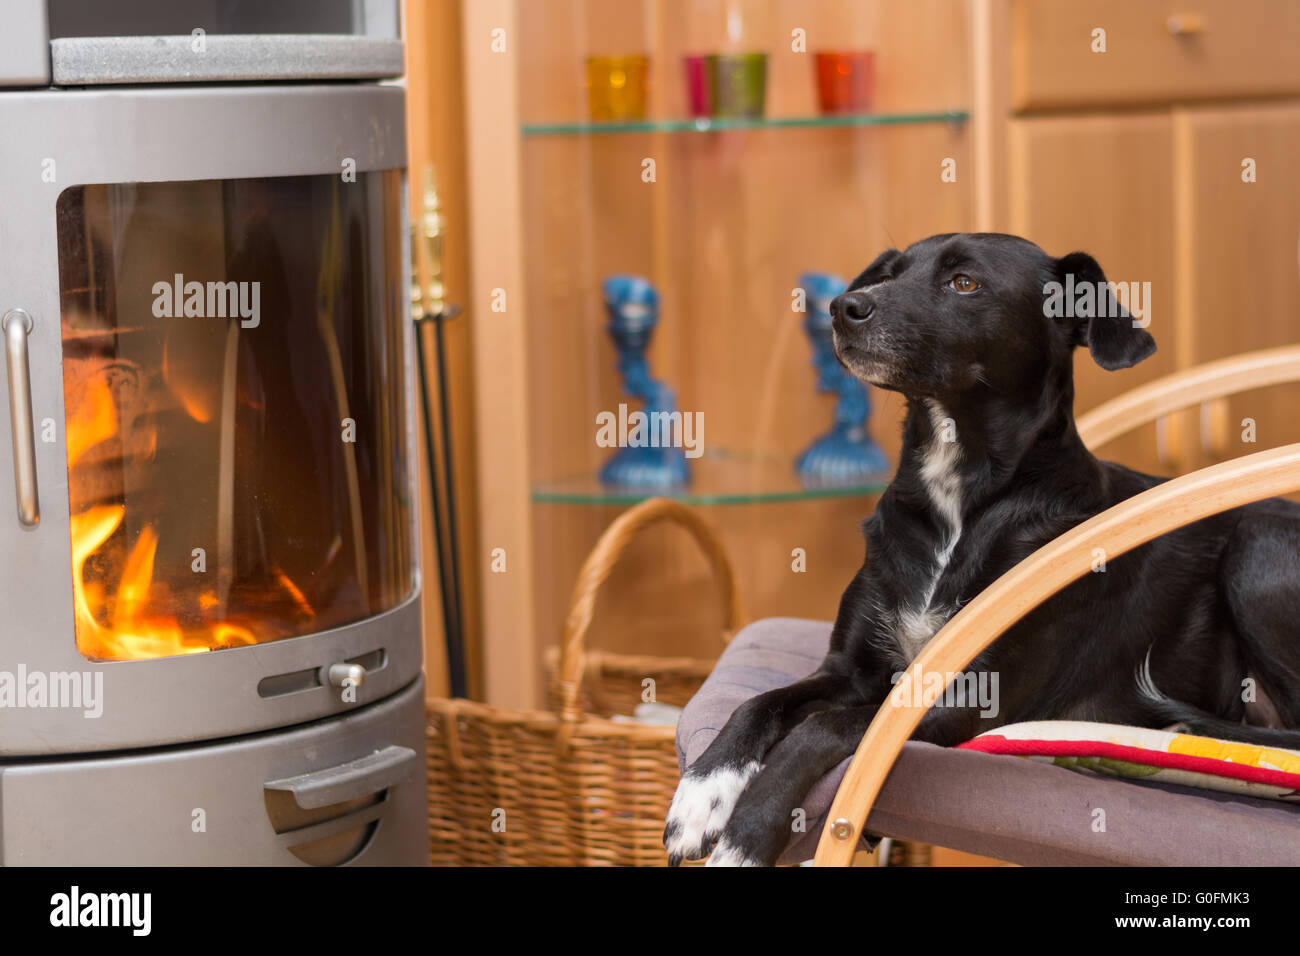 Dog lying on chairs and warm before heater Stock Photo